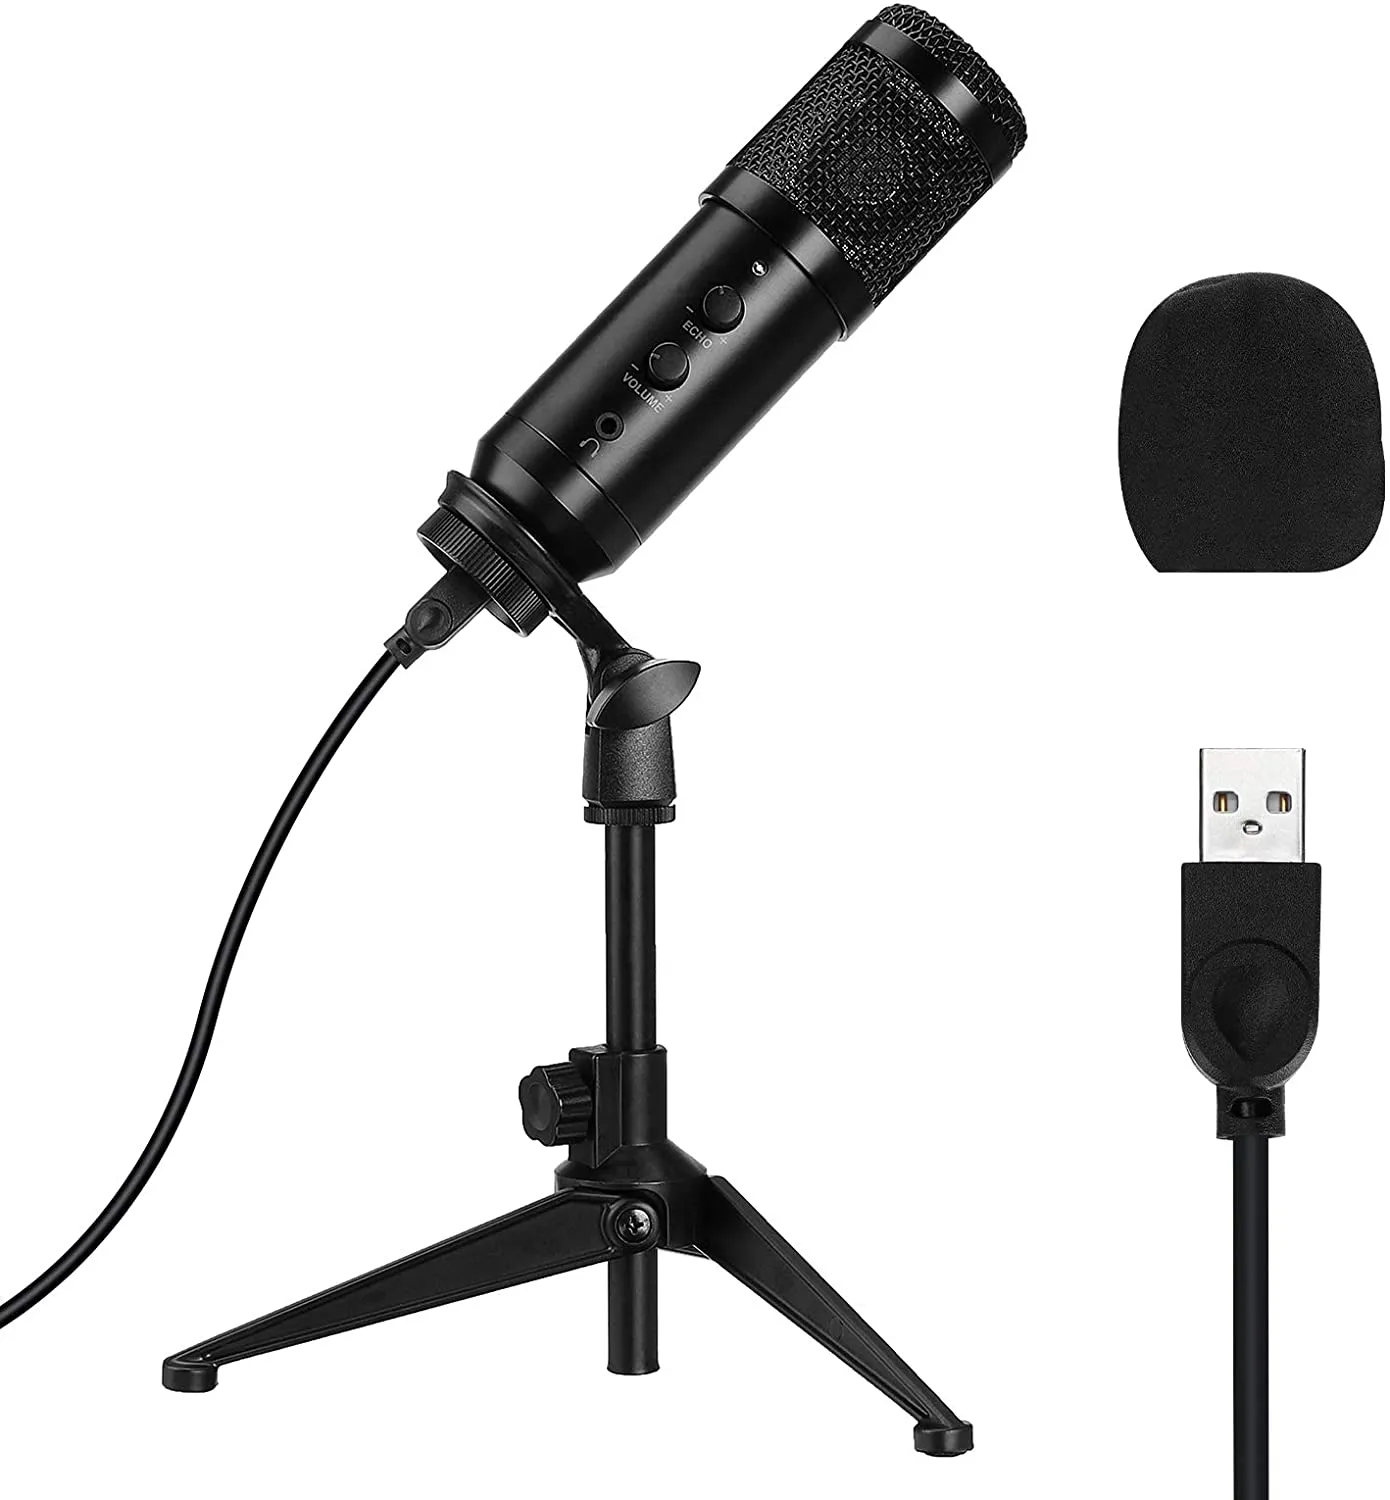 USB Microphone for Computer, NASUM Desktop Podcast Microphone with Adjustable Metal Tripod Stand, Condenser Recording Microphone for Gaming